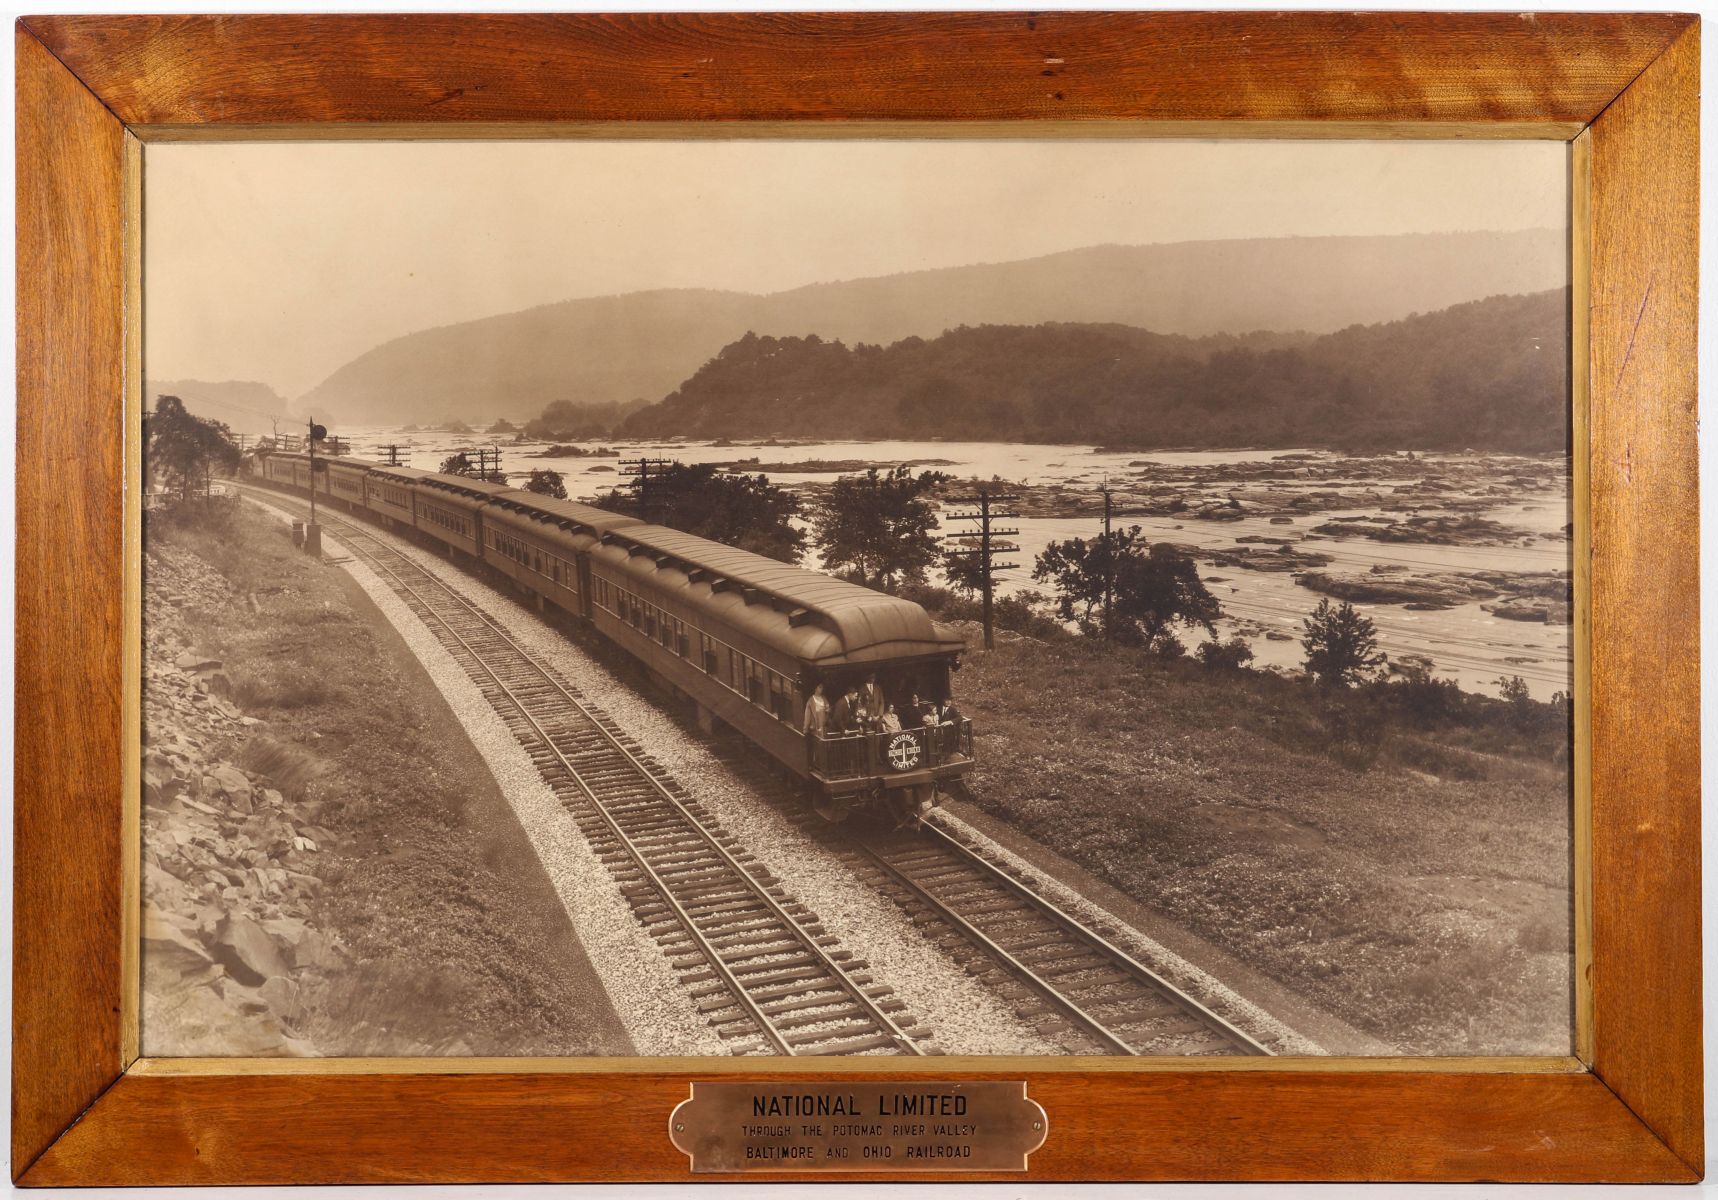 A LARGE PHOTOGRAVURE OF THE B&O NATIONAL LIMITED